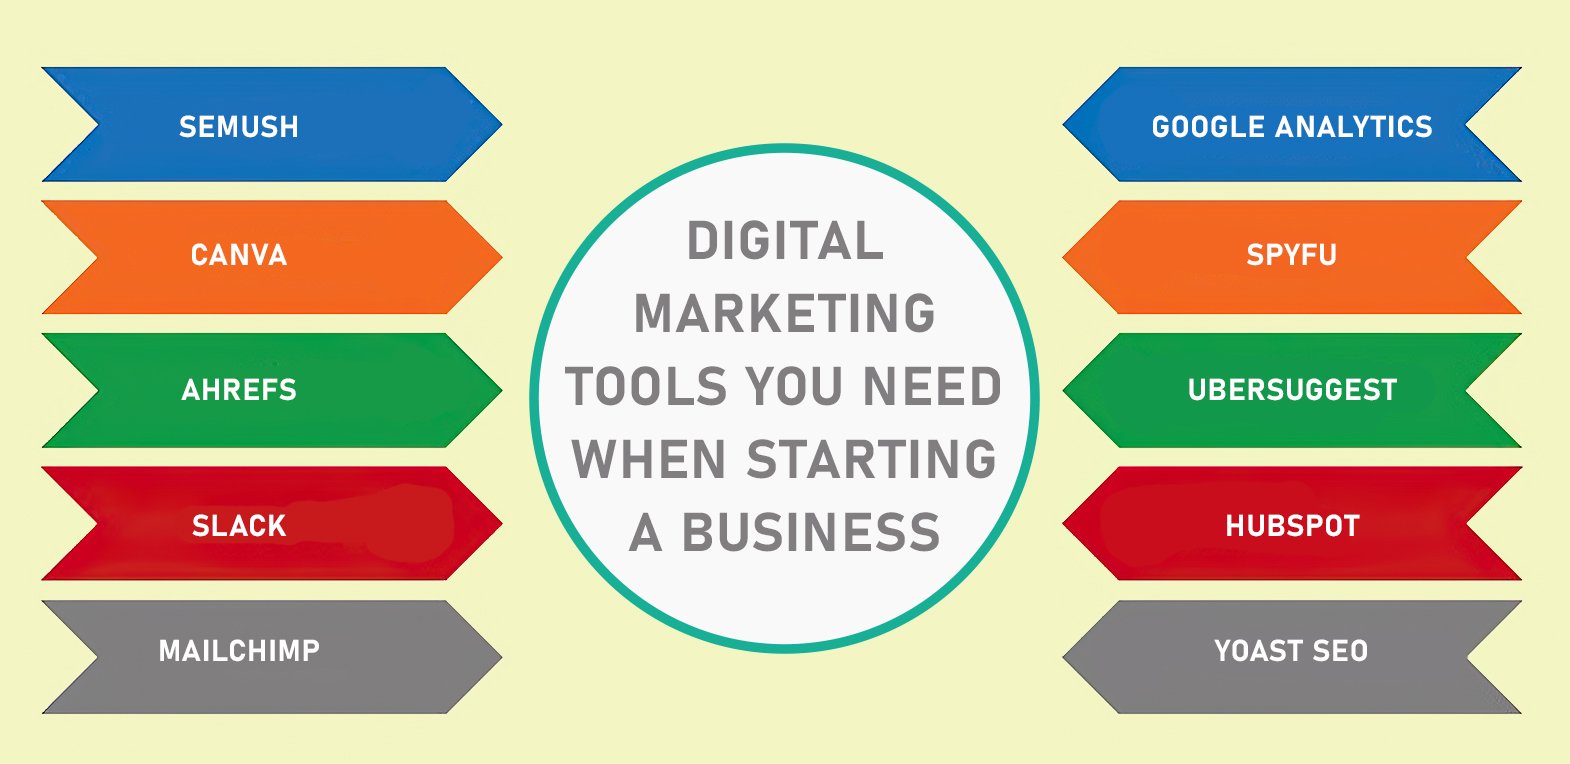 Digital-Marketing-Tools-You-Need-When-Starting-a-Business-1